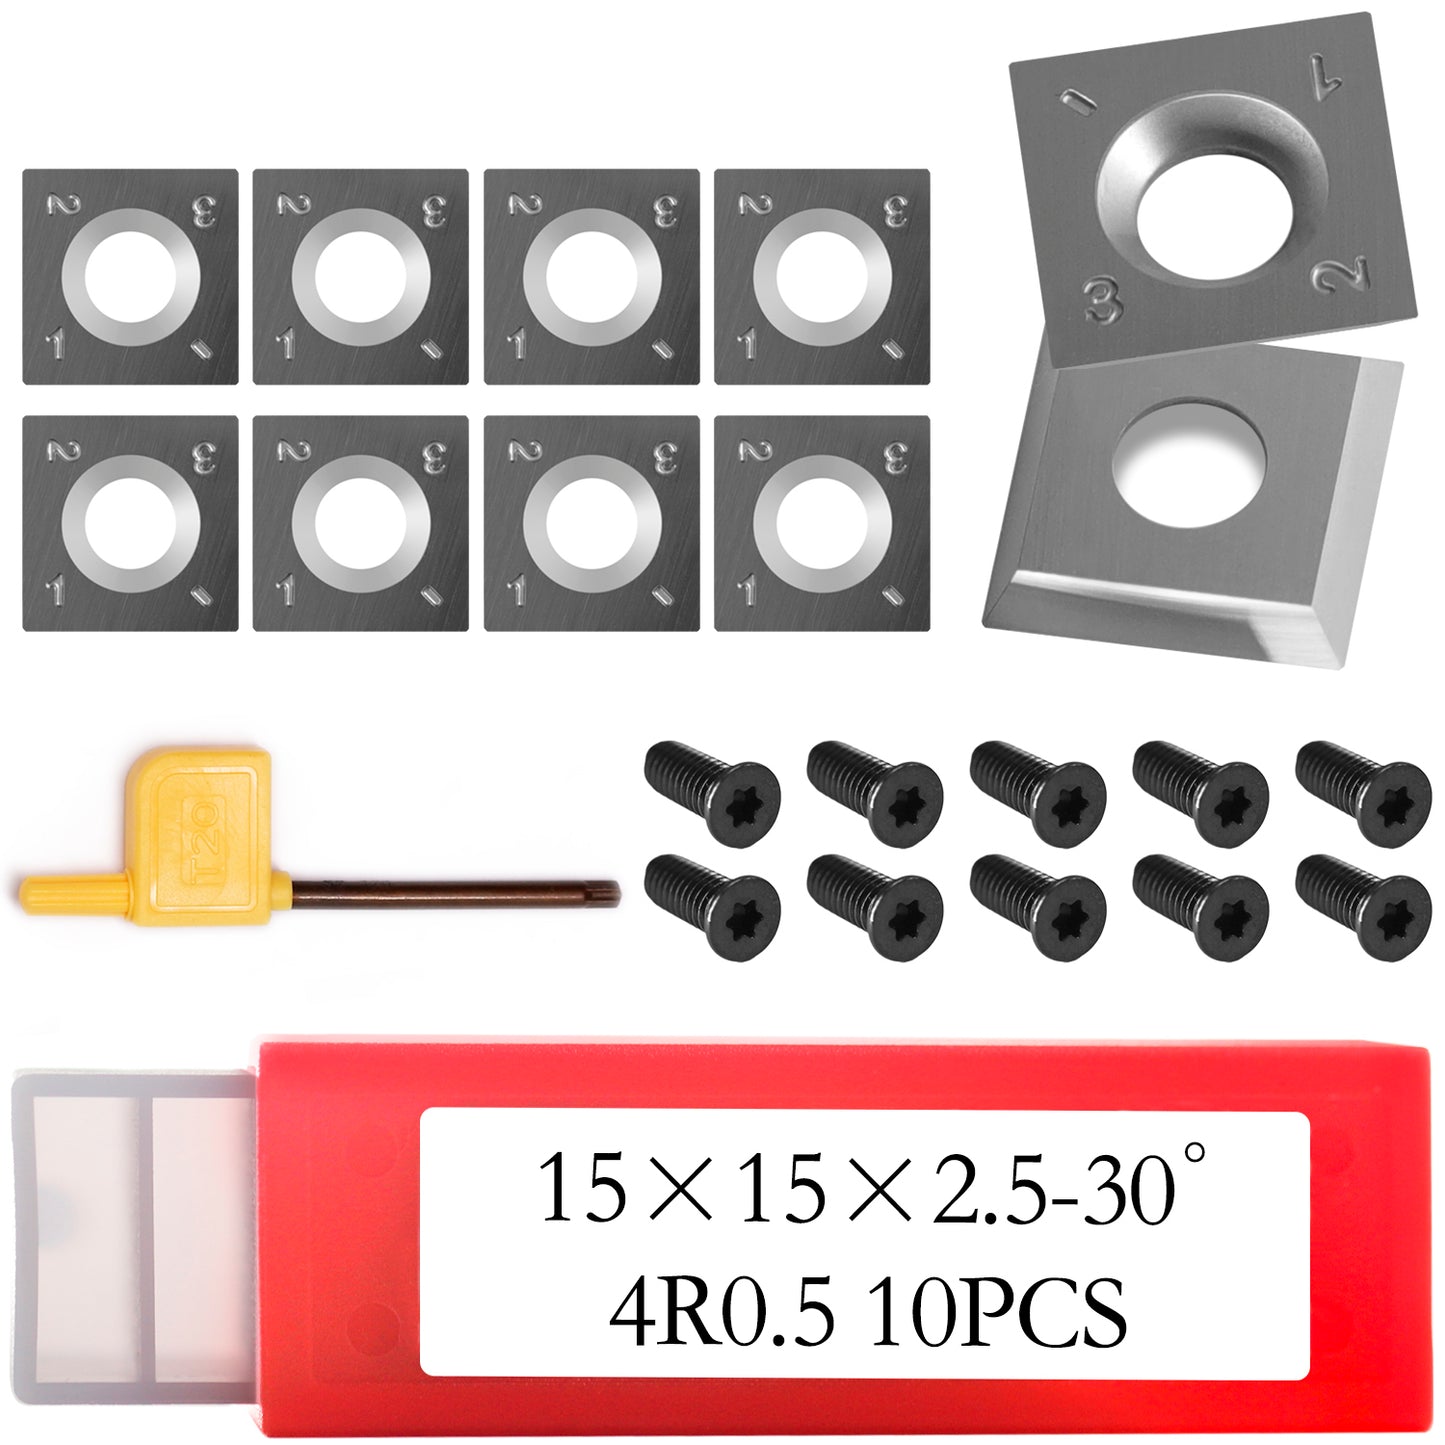 Woodworking Square Tungsten Carbide Inserts 15x15x2.5mm-30°-4R0.5  Replacement Cutter  for Oliver/ Axminster/ Rikon Planer or Jointer of Helical Spiral Cutterheads